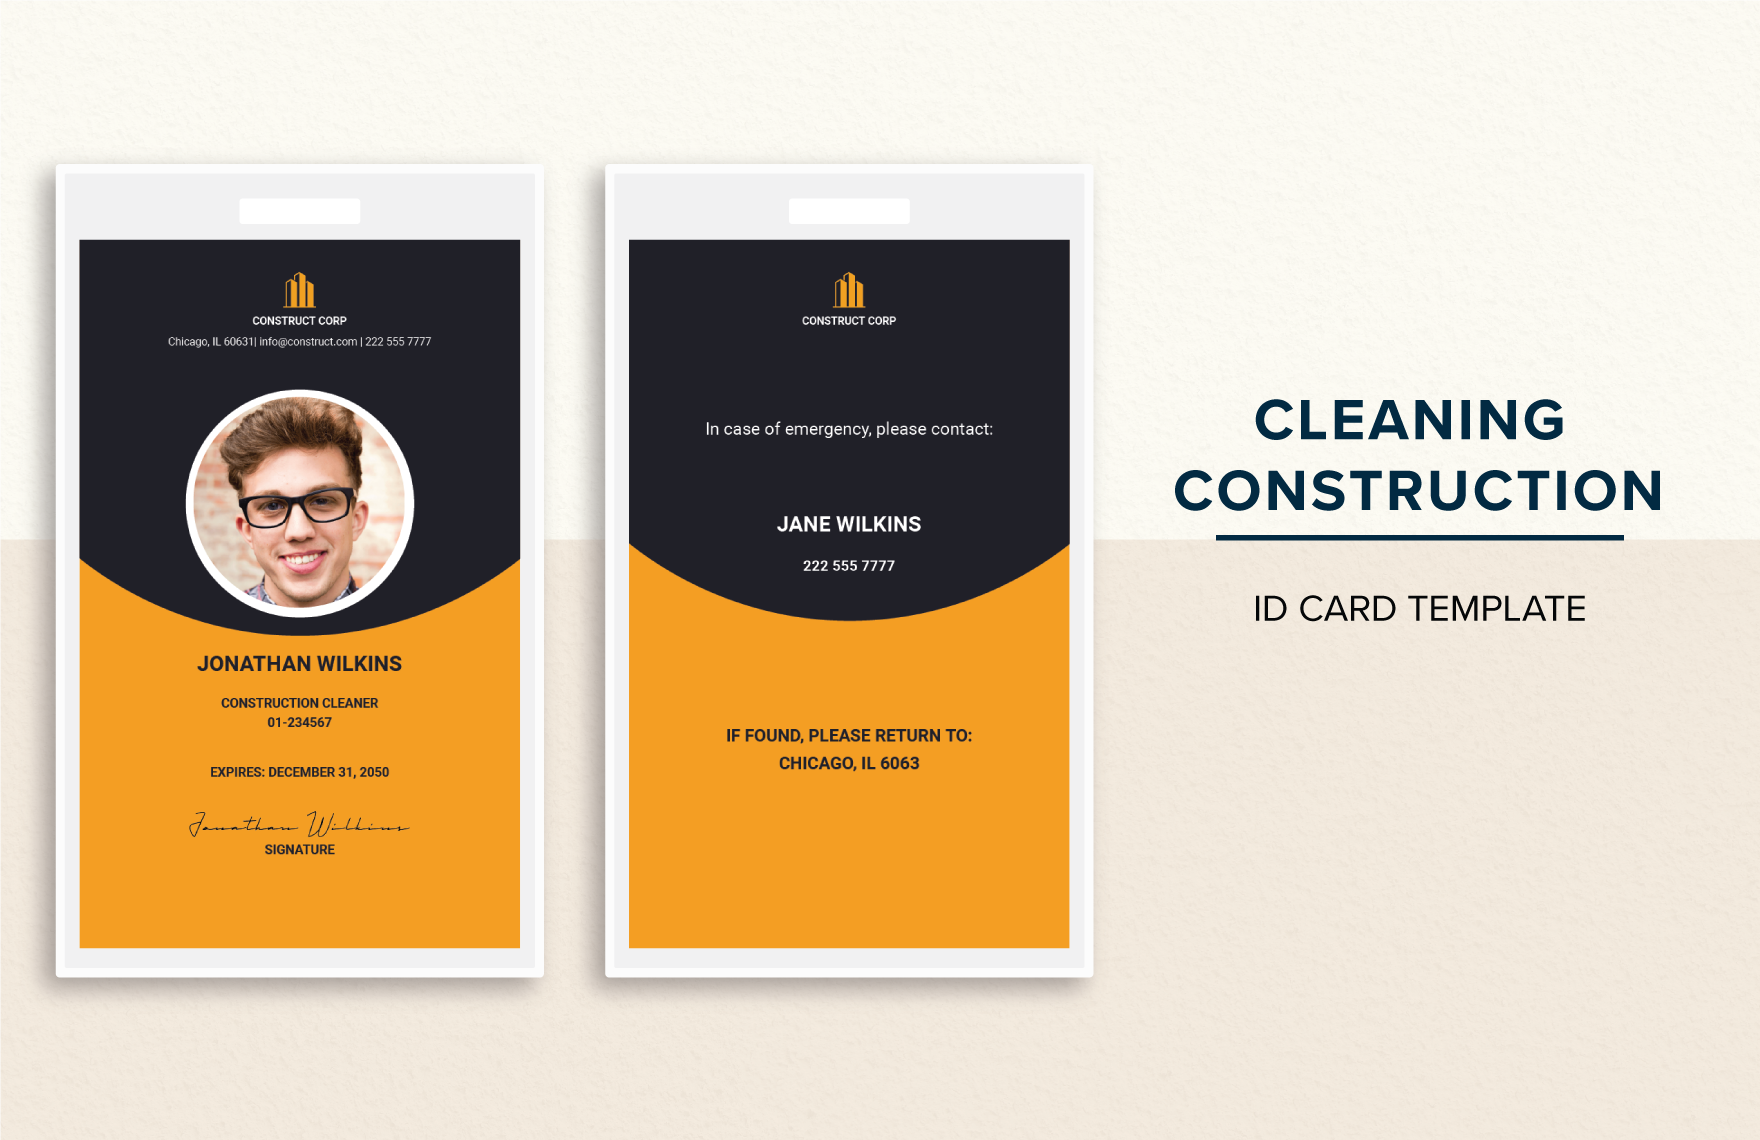 Cleaning Construction ID Card Template